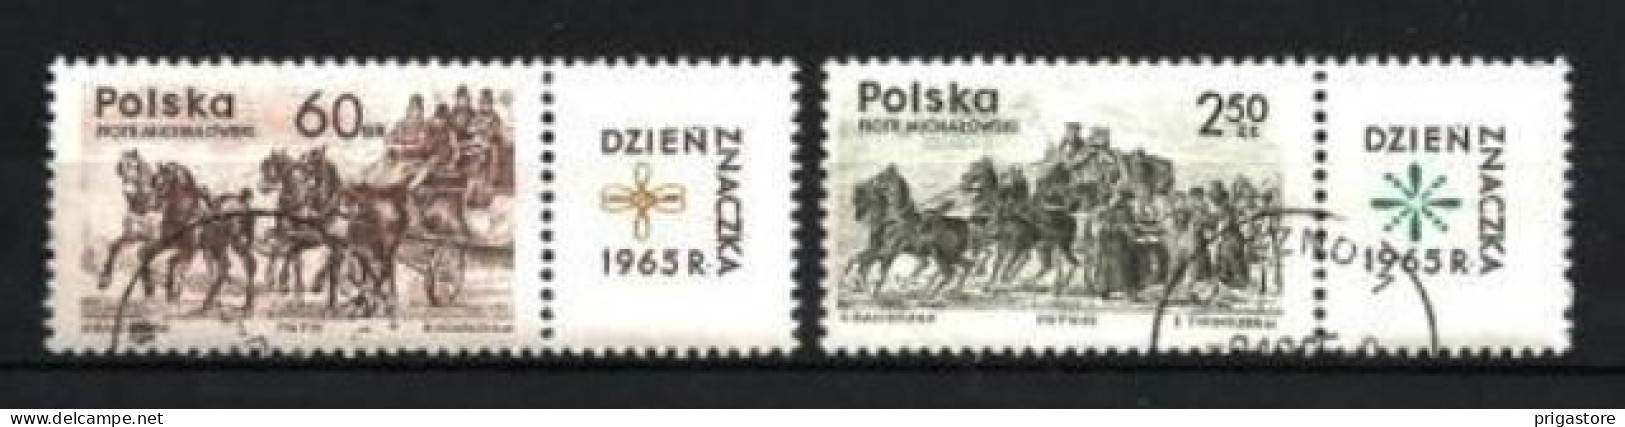 Chevaux Pologne 1965 (41) Yvert N° 1480 + 1481 Oblitéré Used - Paarden